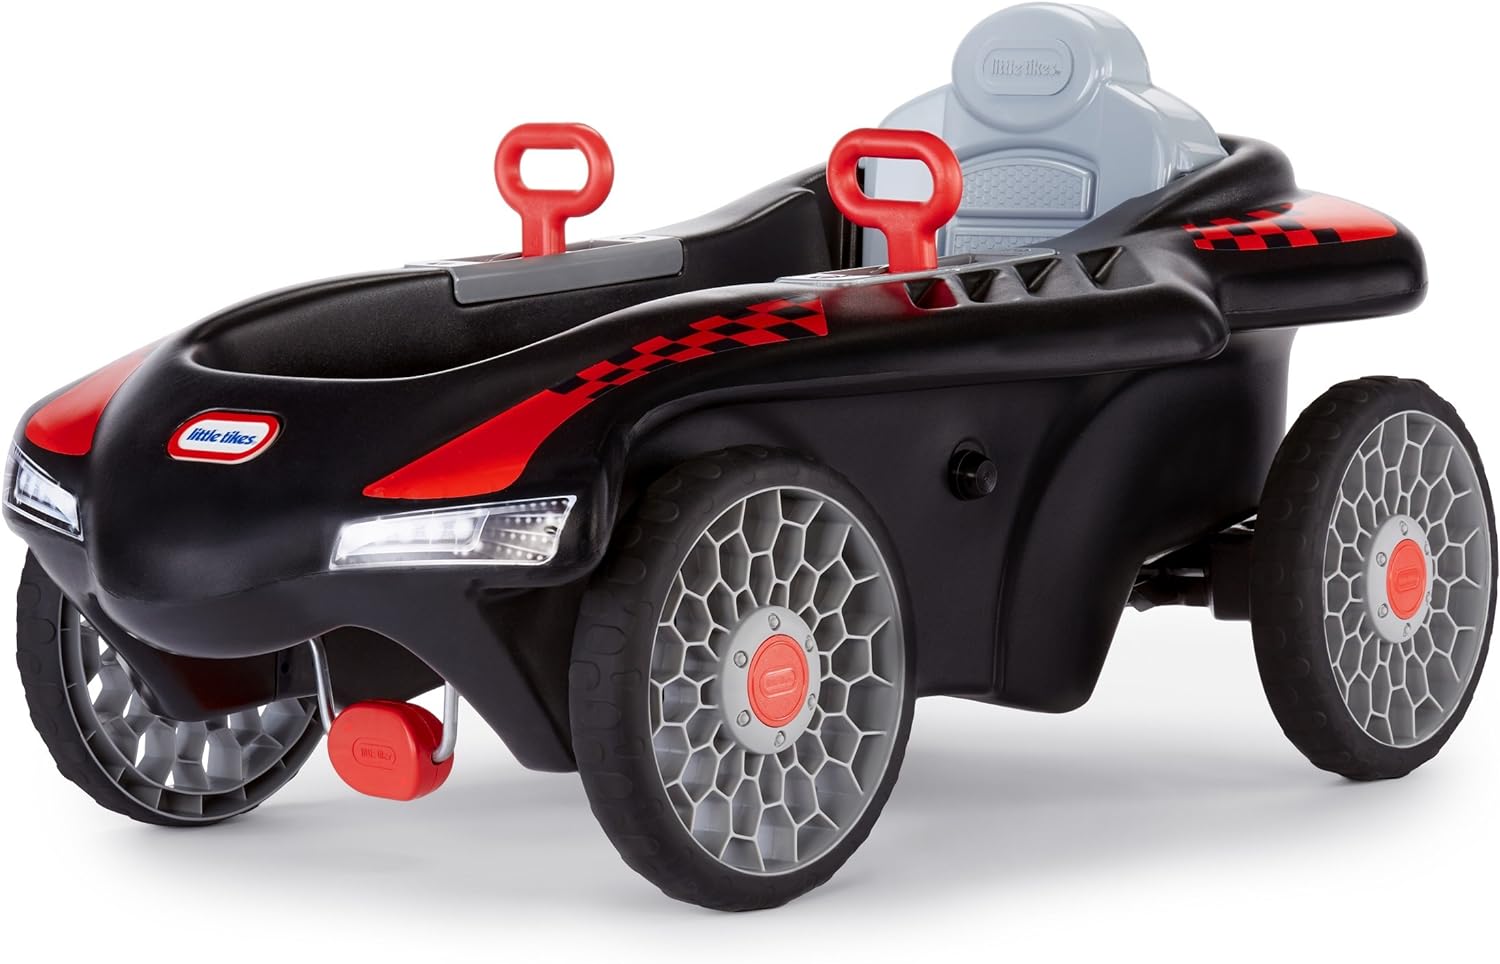 Best Pedal Car for Children: Top Picks for Kids' Fun Rides